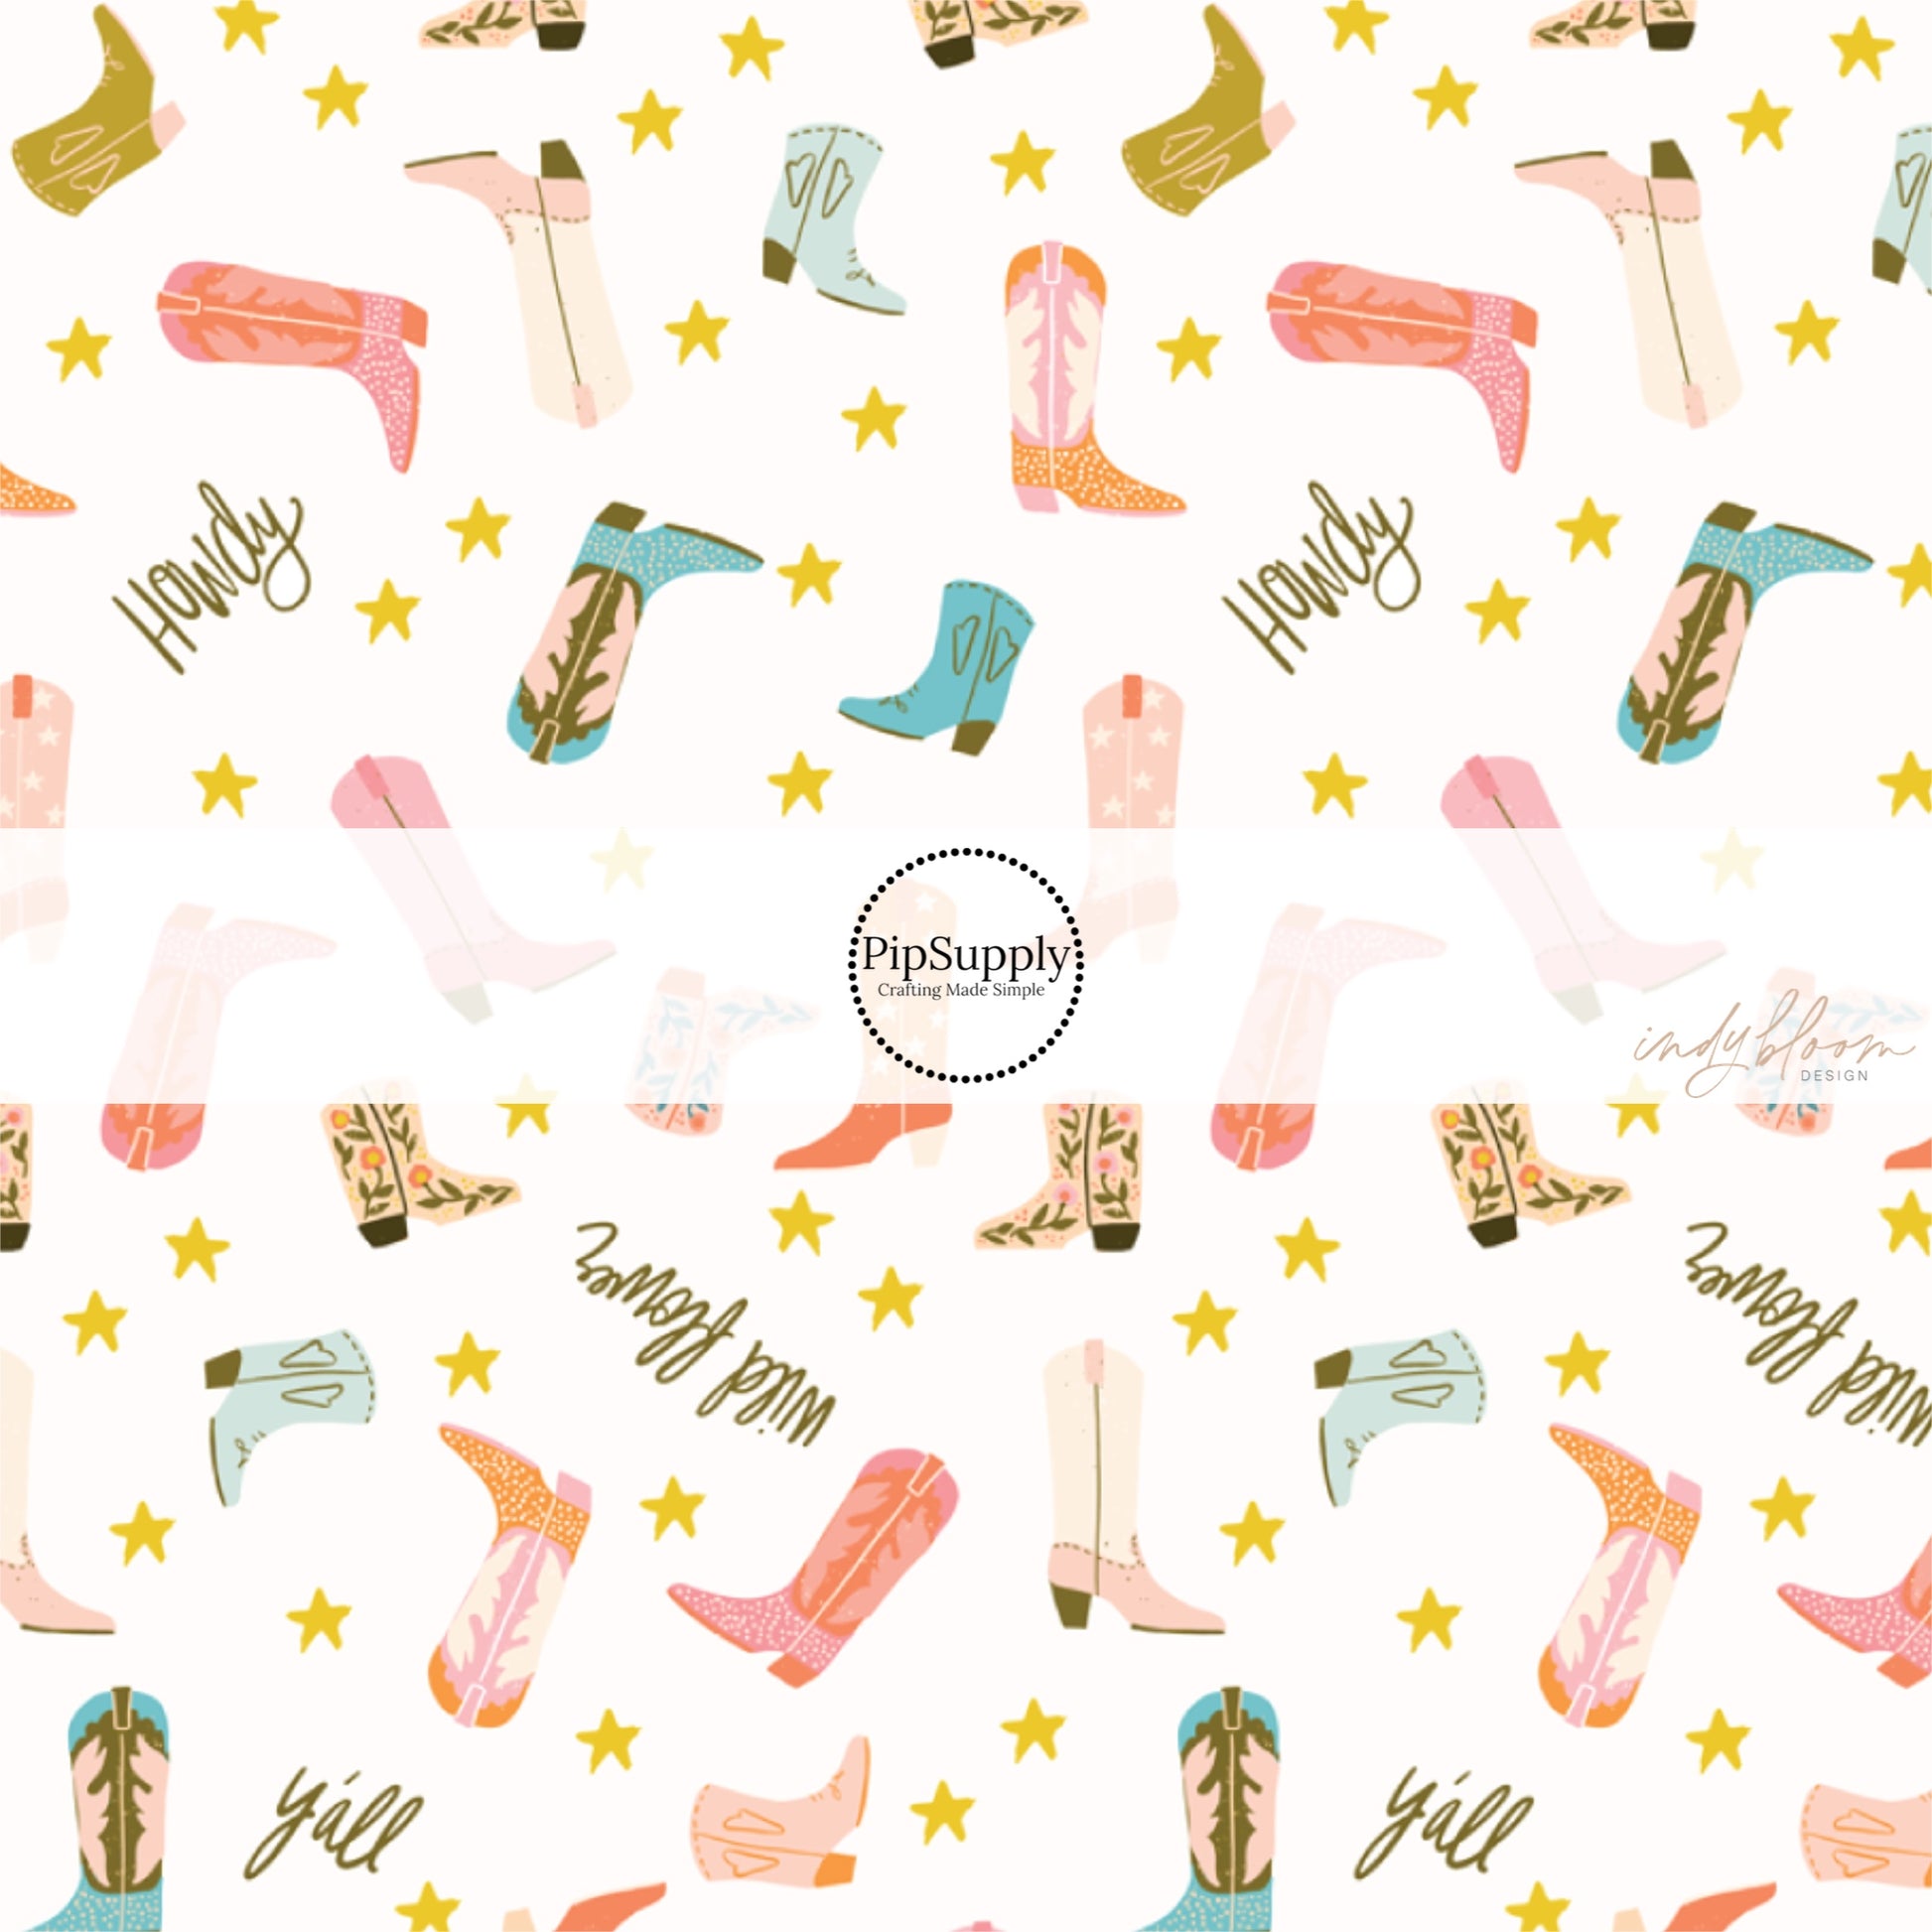 This summer fabric by the yard feature "Howdy" and cowgirl boots on cream. This fun summer western themed fabric can be used for all your sewing and crafting needs!